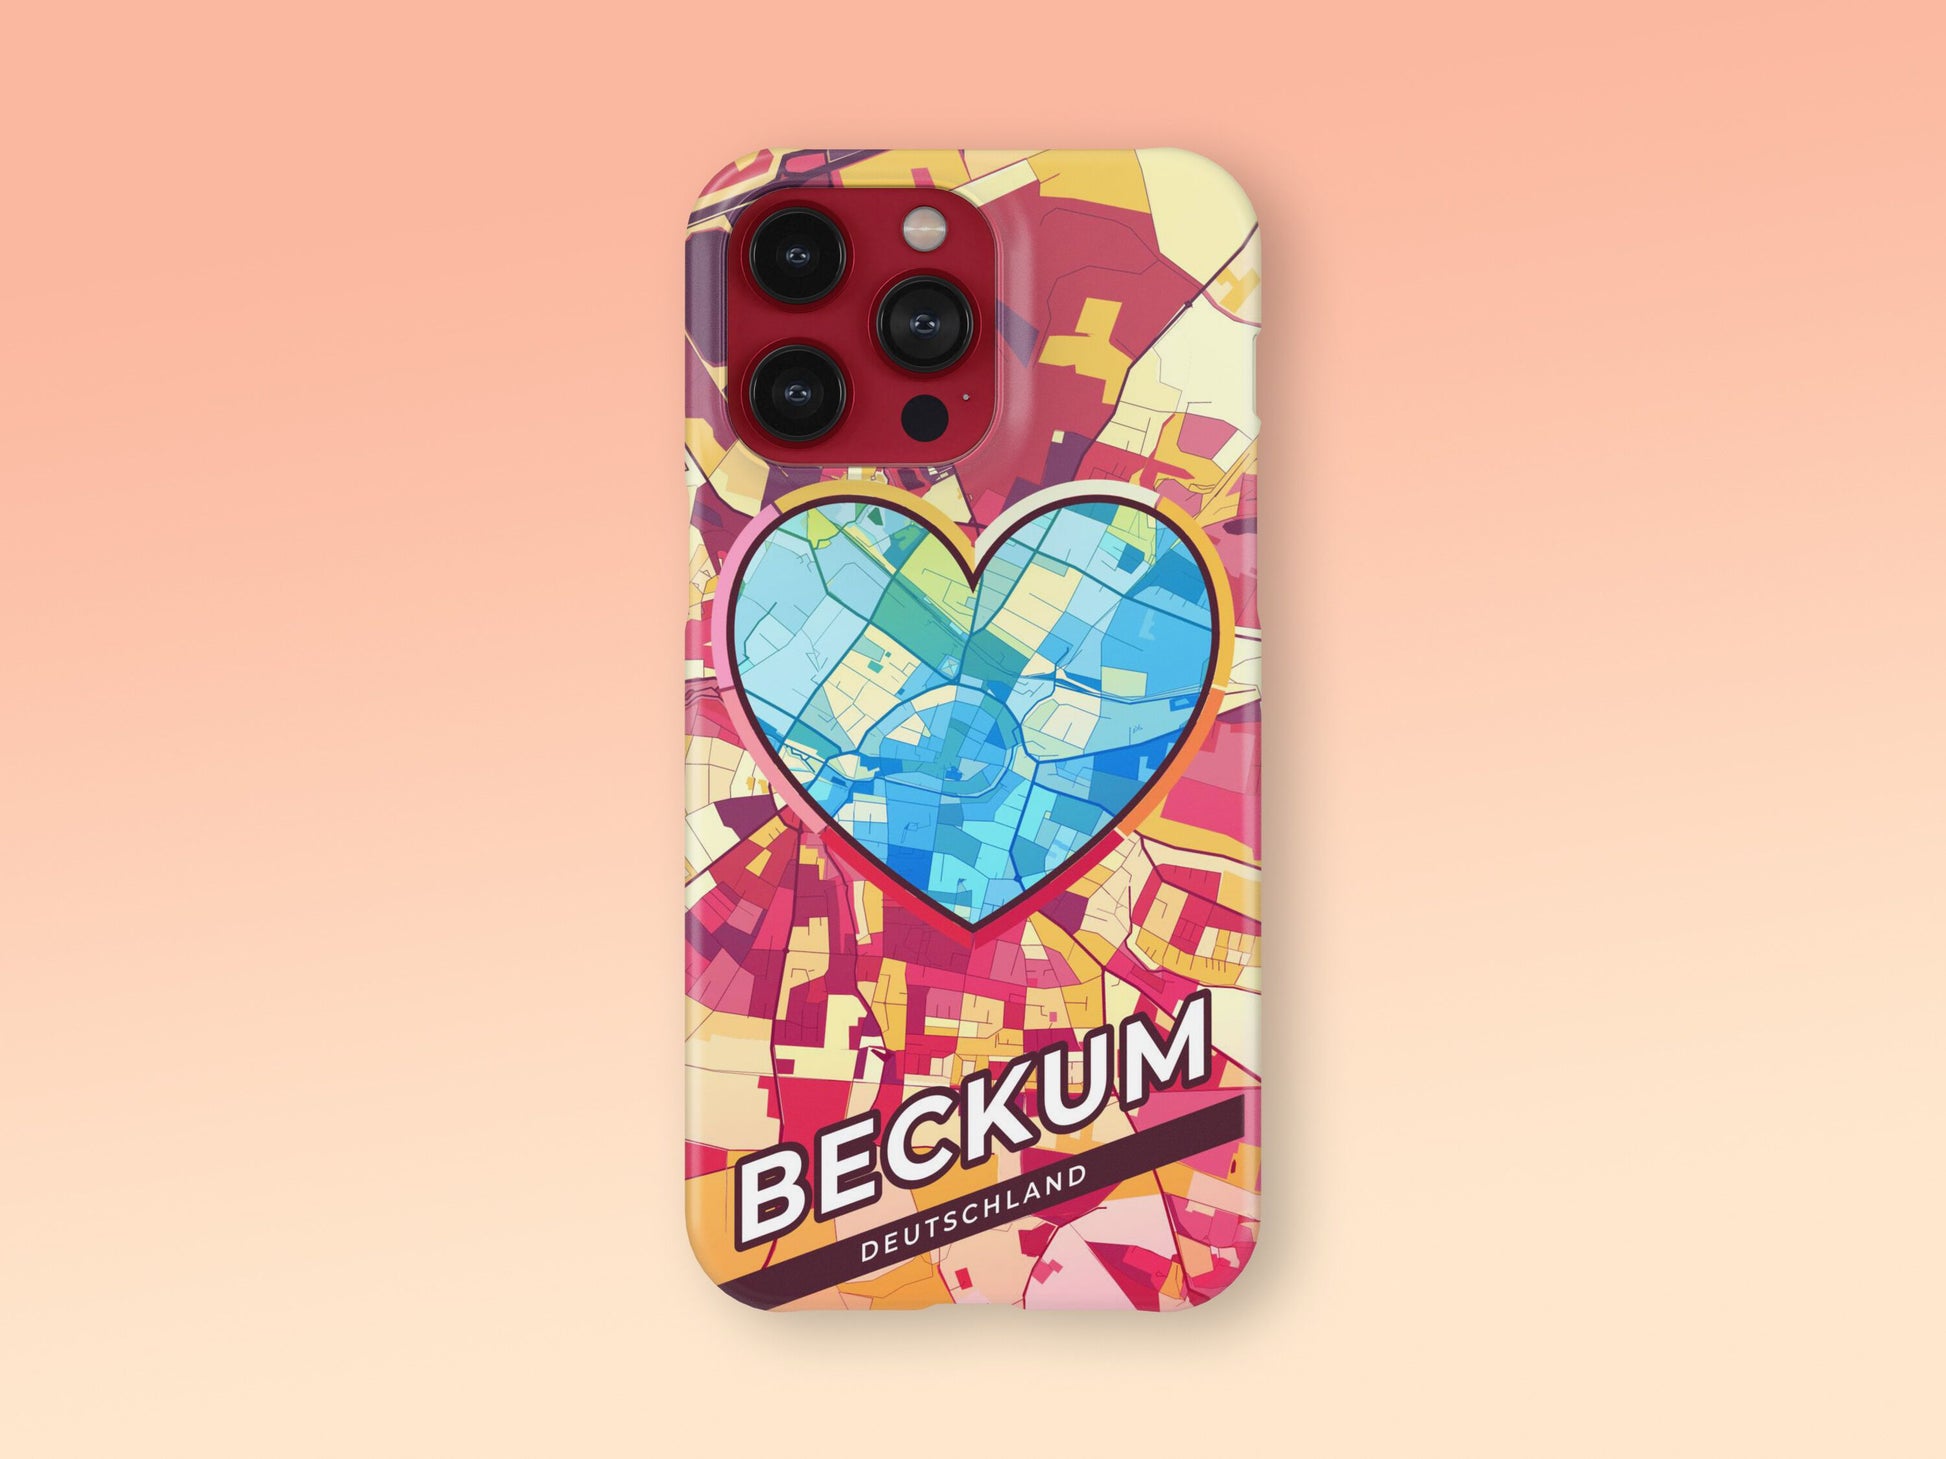 Beckum Deutschland slim phone case with colorful icon. Birthday, wedding or housewarming gift. Couple match cases. 2